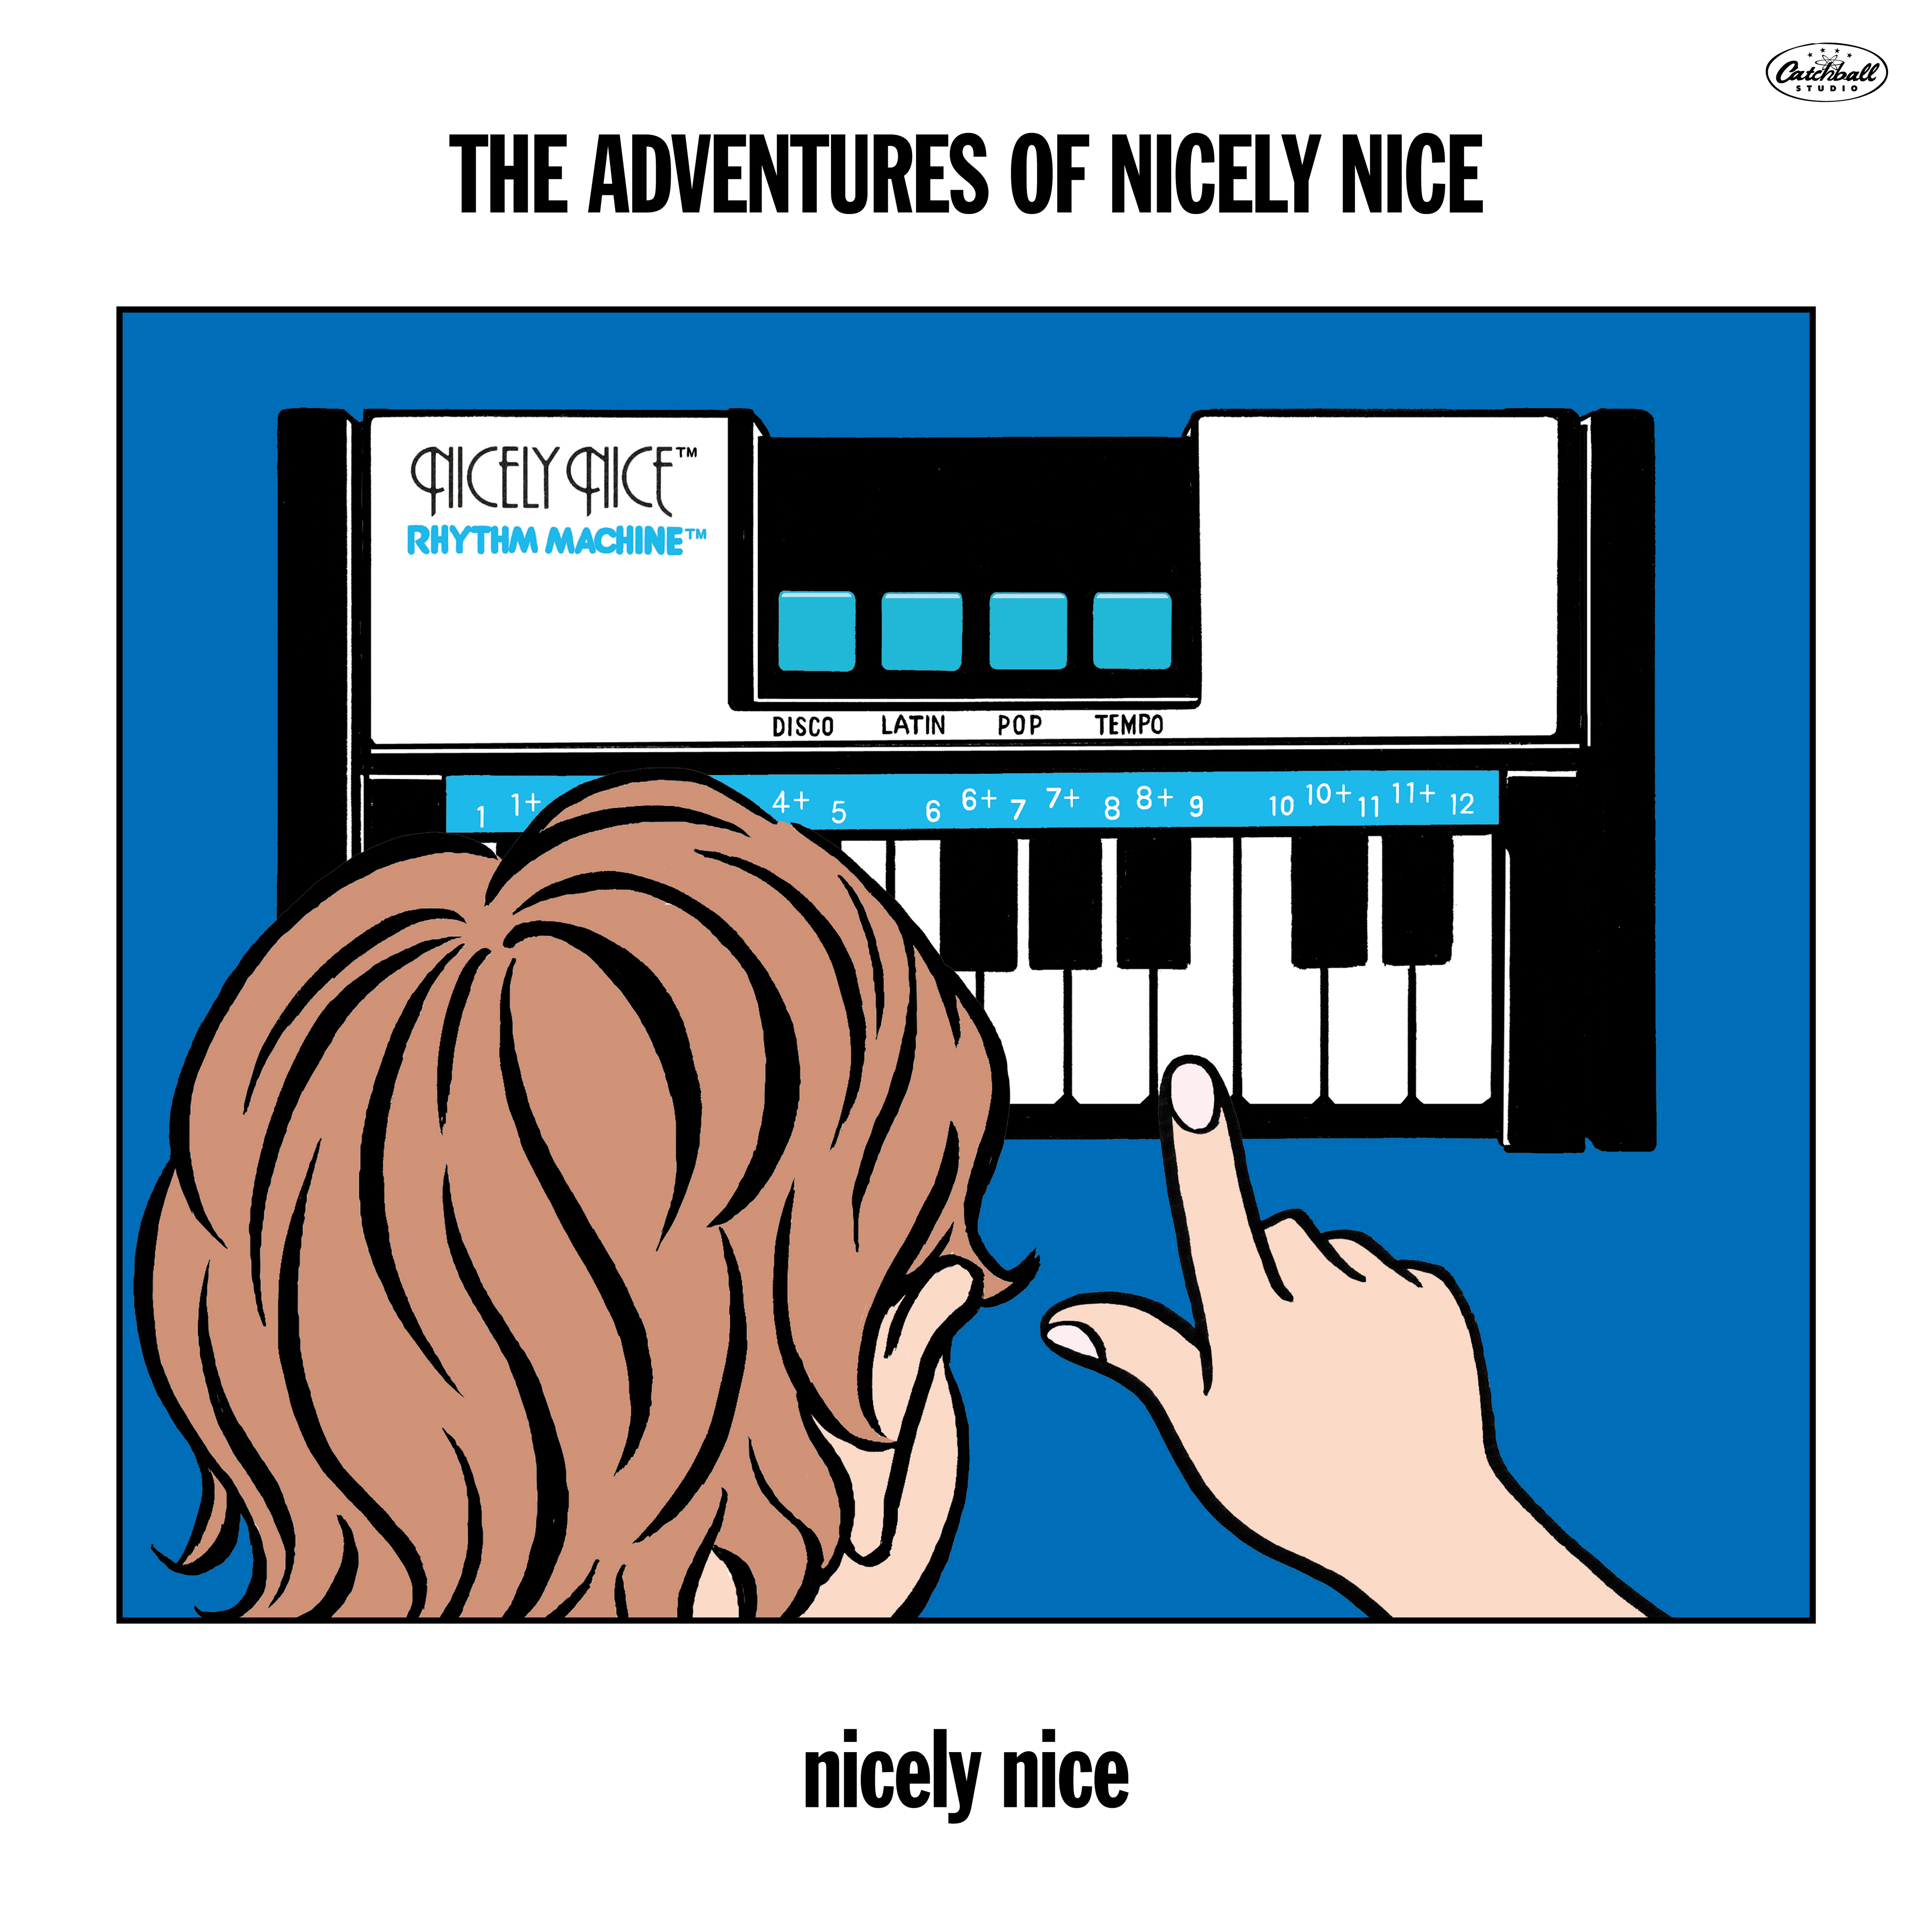 The adventures of nicely nice